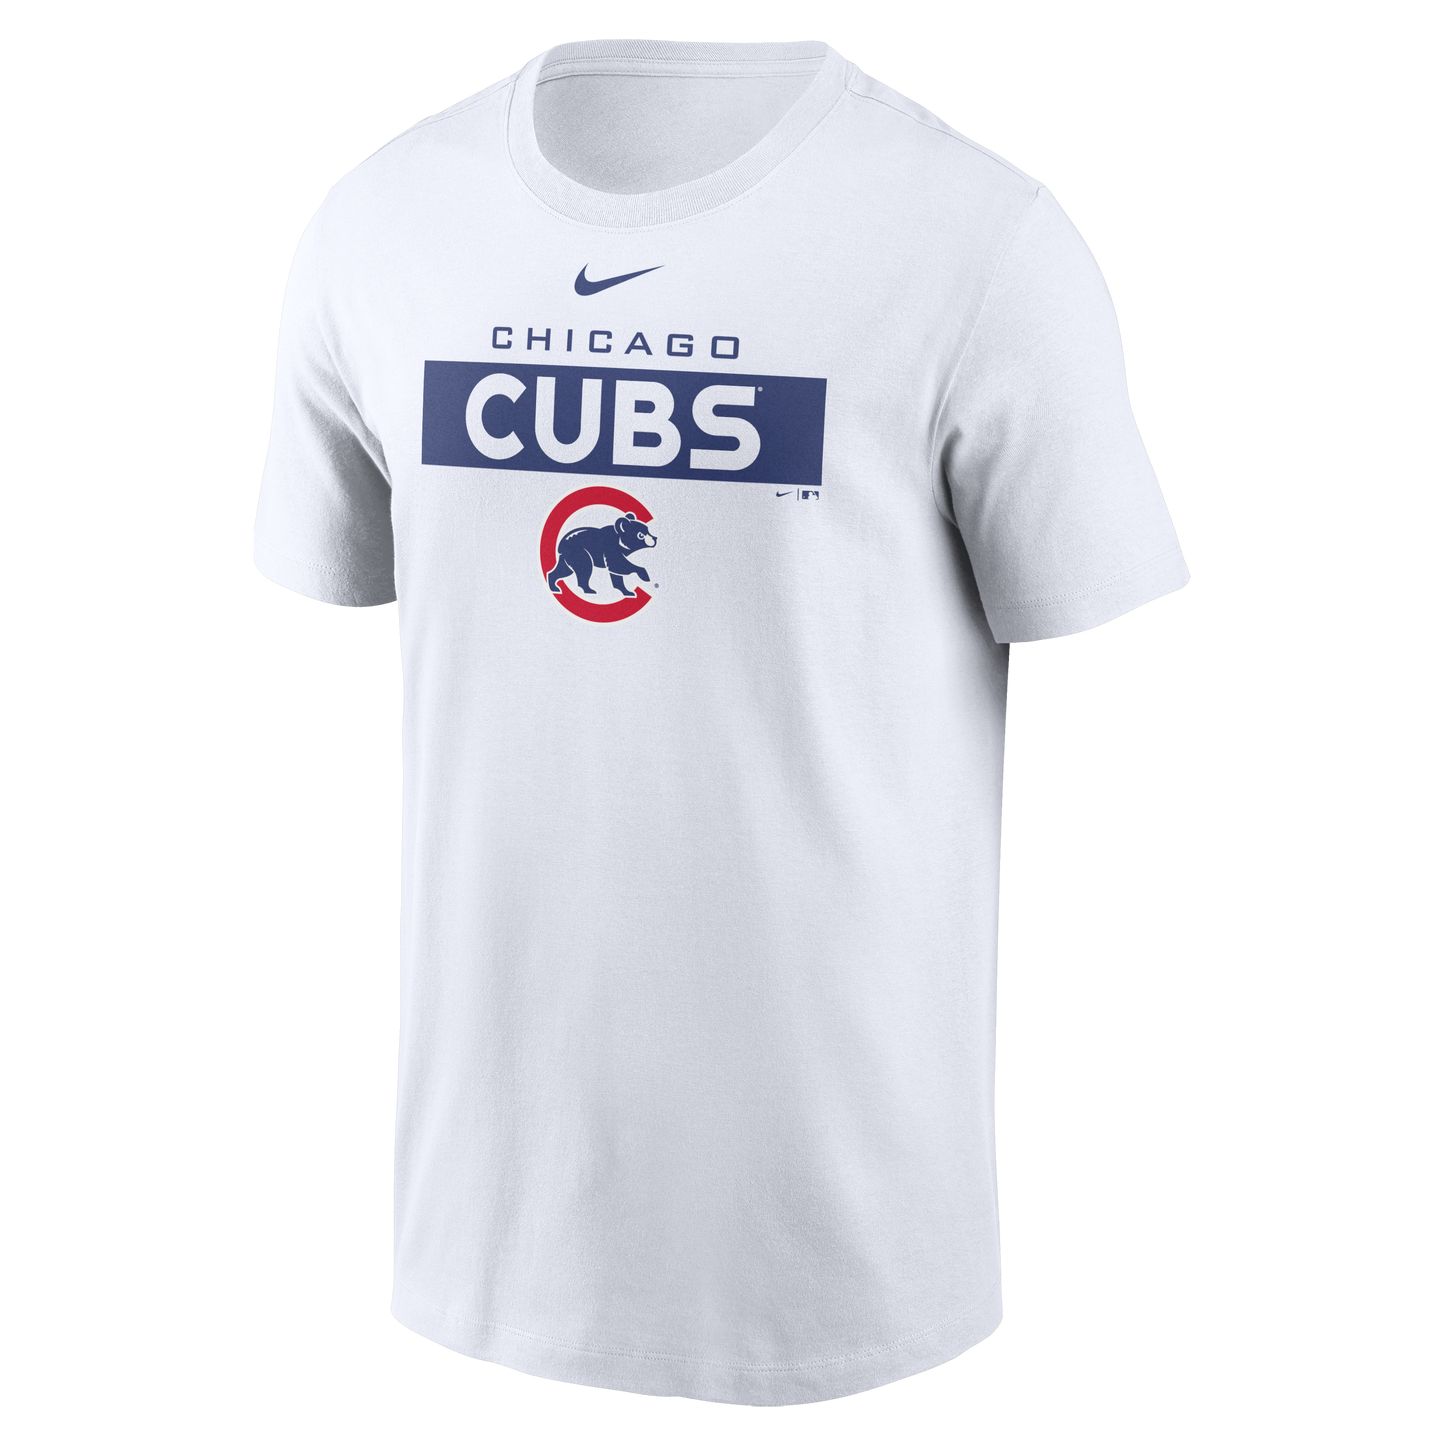 Chicago Cubs Nike Men's Team Issue T-Shirt